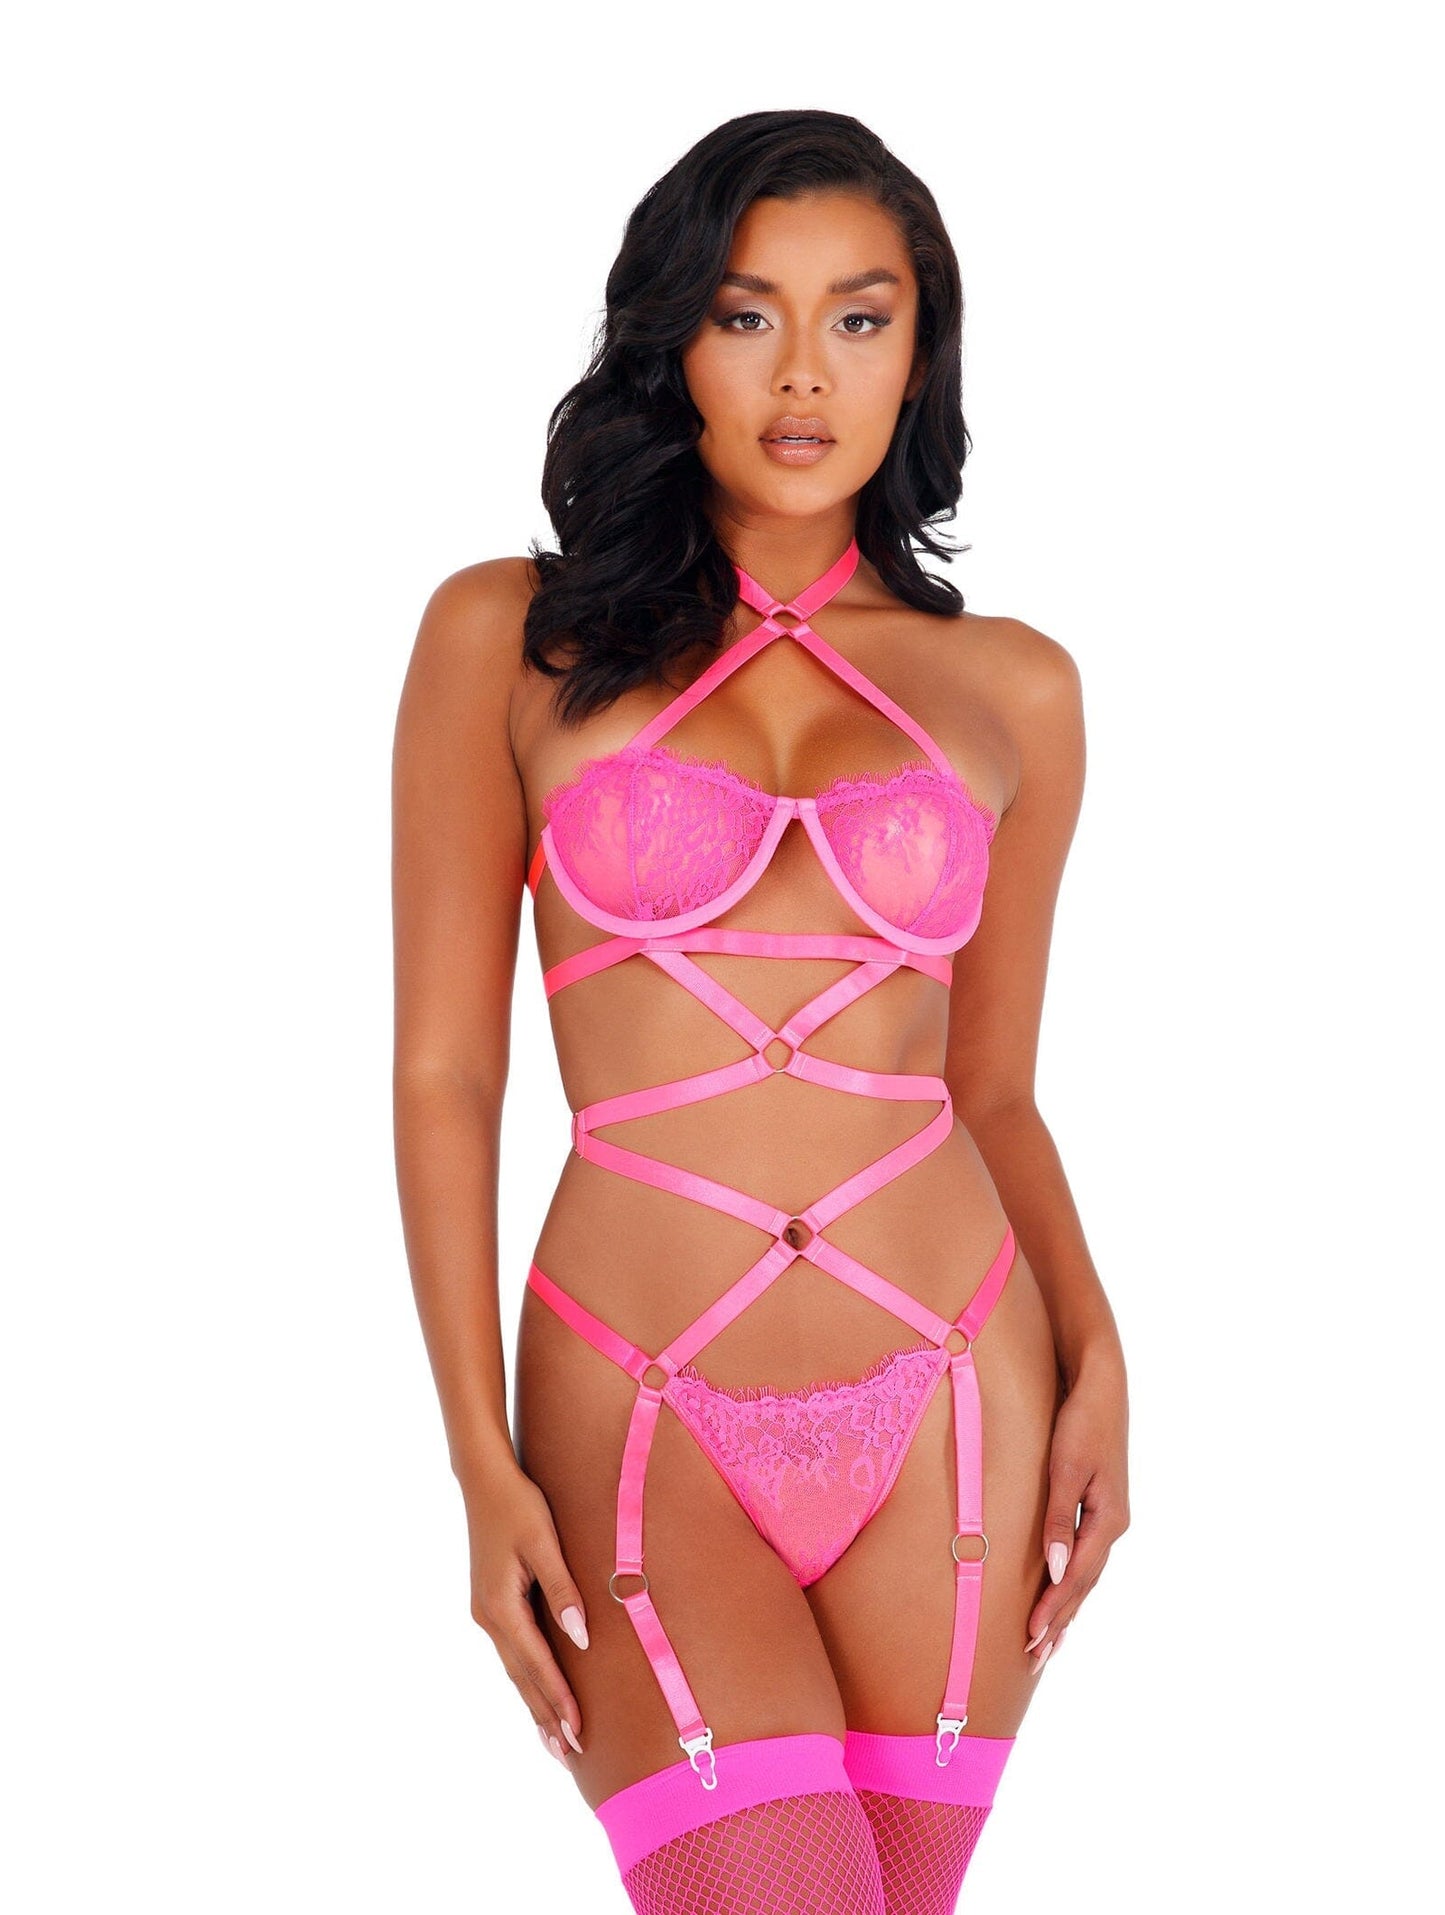 LI421 - Lacey Criss-Cross Underwired Teddy with Garters lingerie Exotic Peach Small Hot Pink 